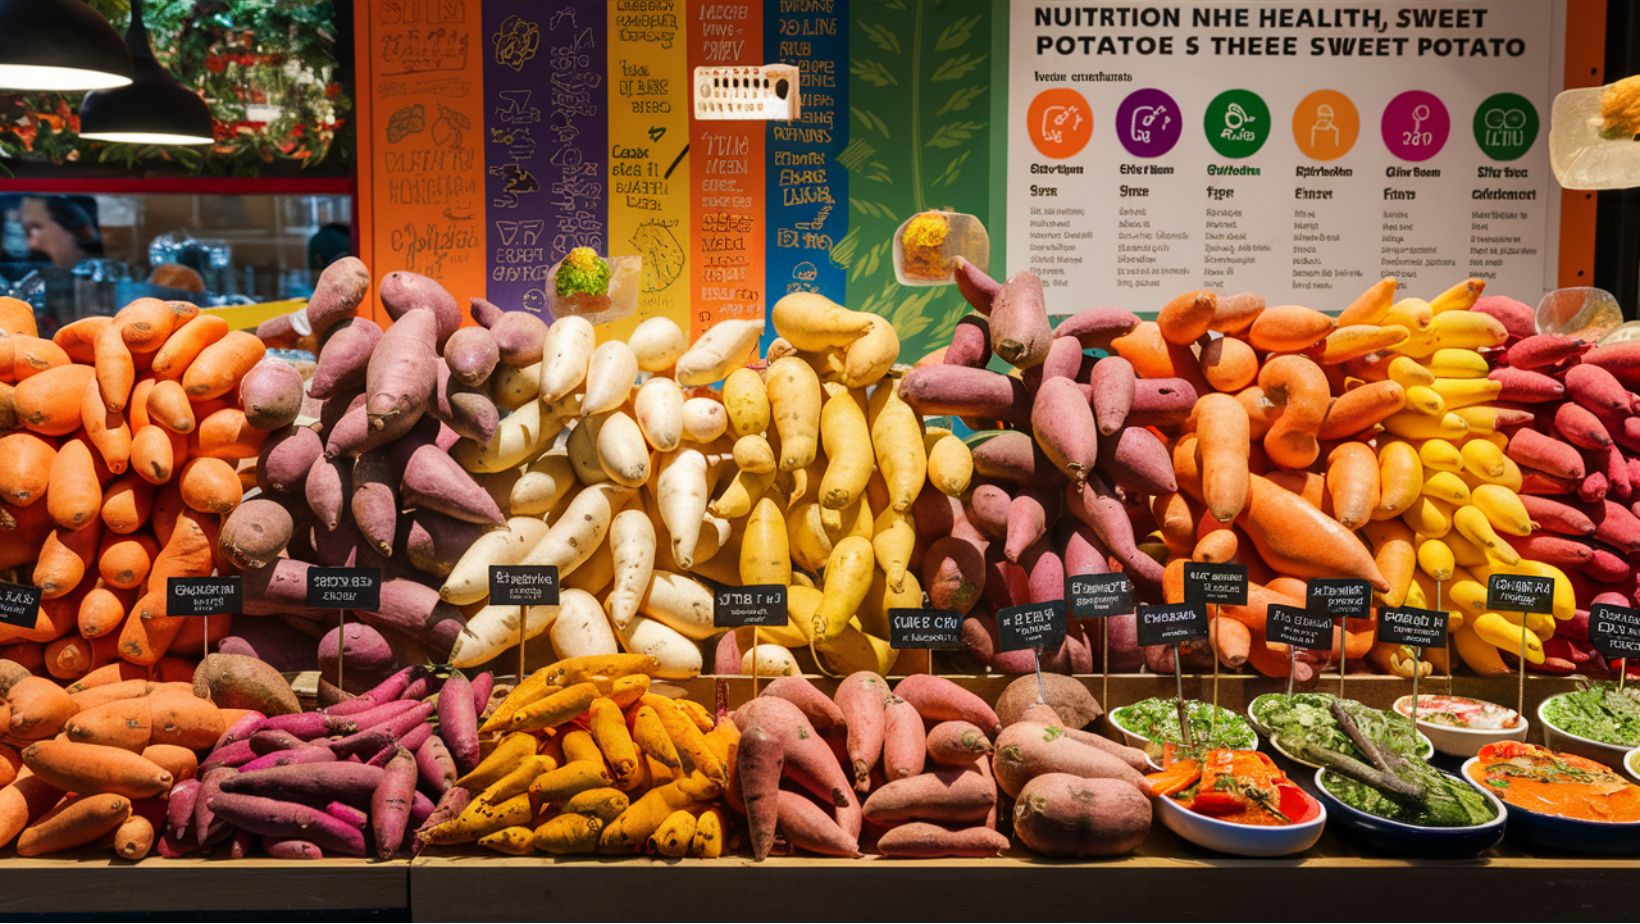 What Color Sweet Potato Is the Healthiest? Healthiest sweet potato color, Sweet potato nutritional comparison, Nutritional benefits of sweet potatoes